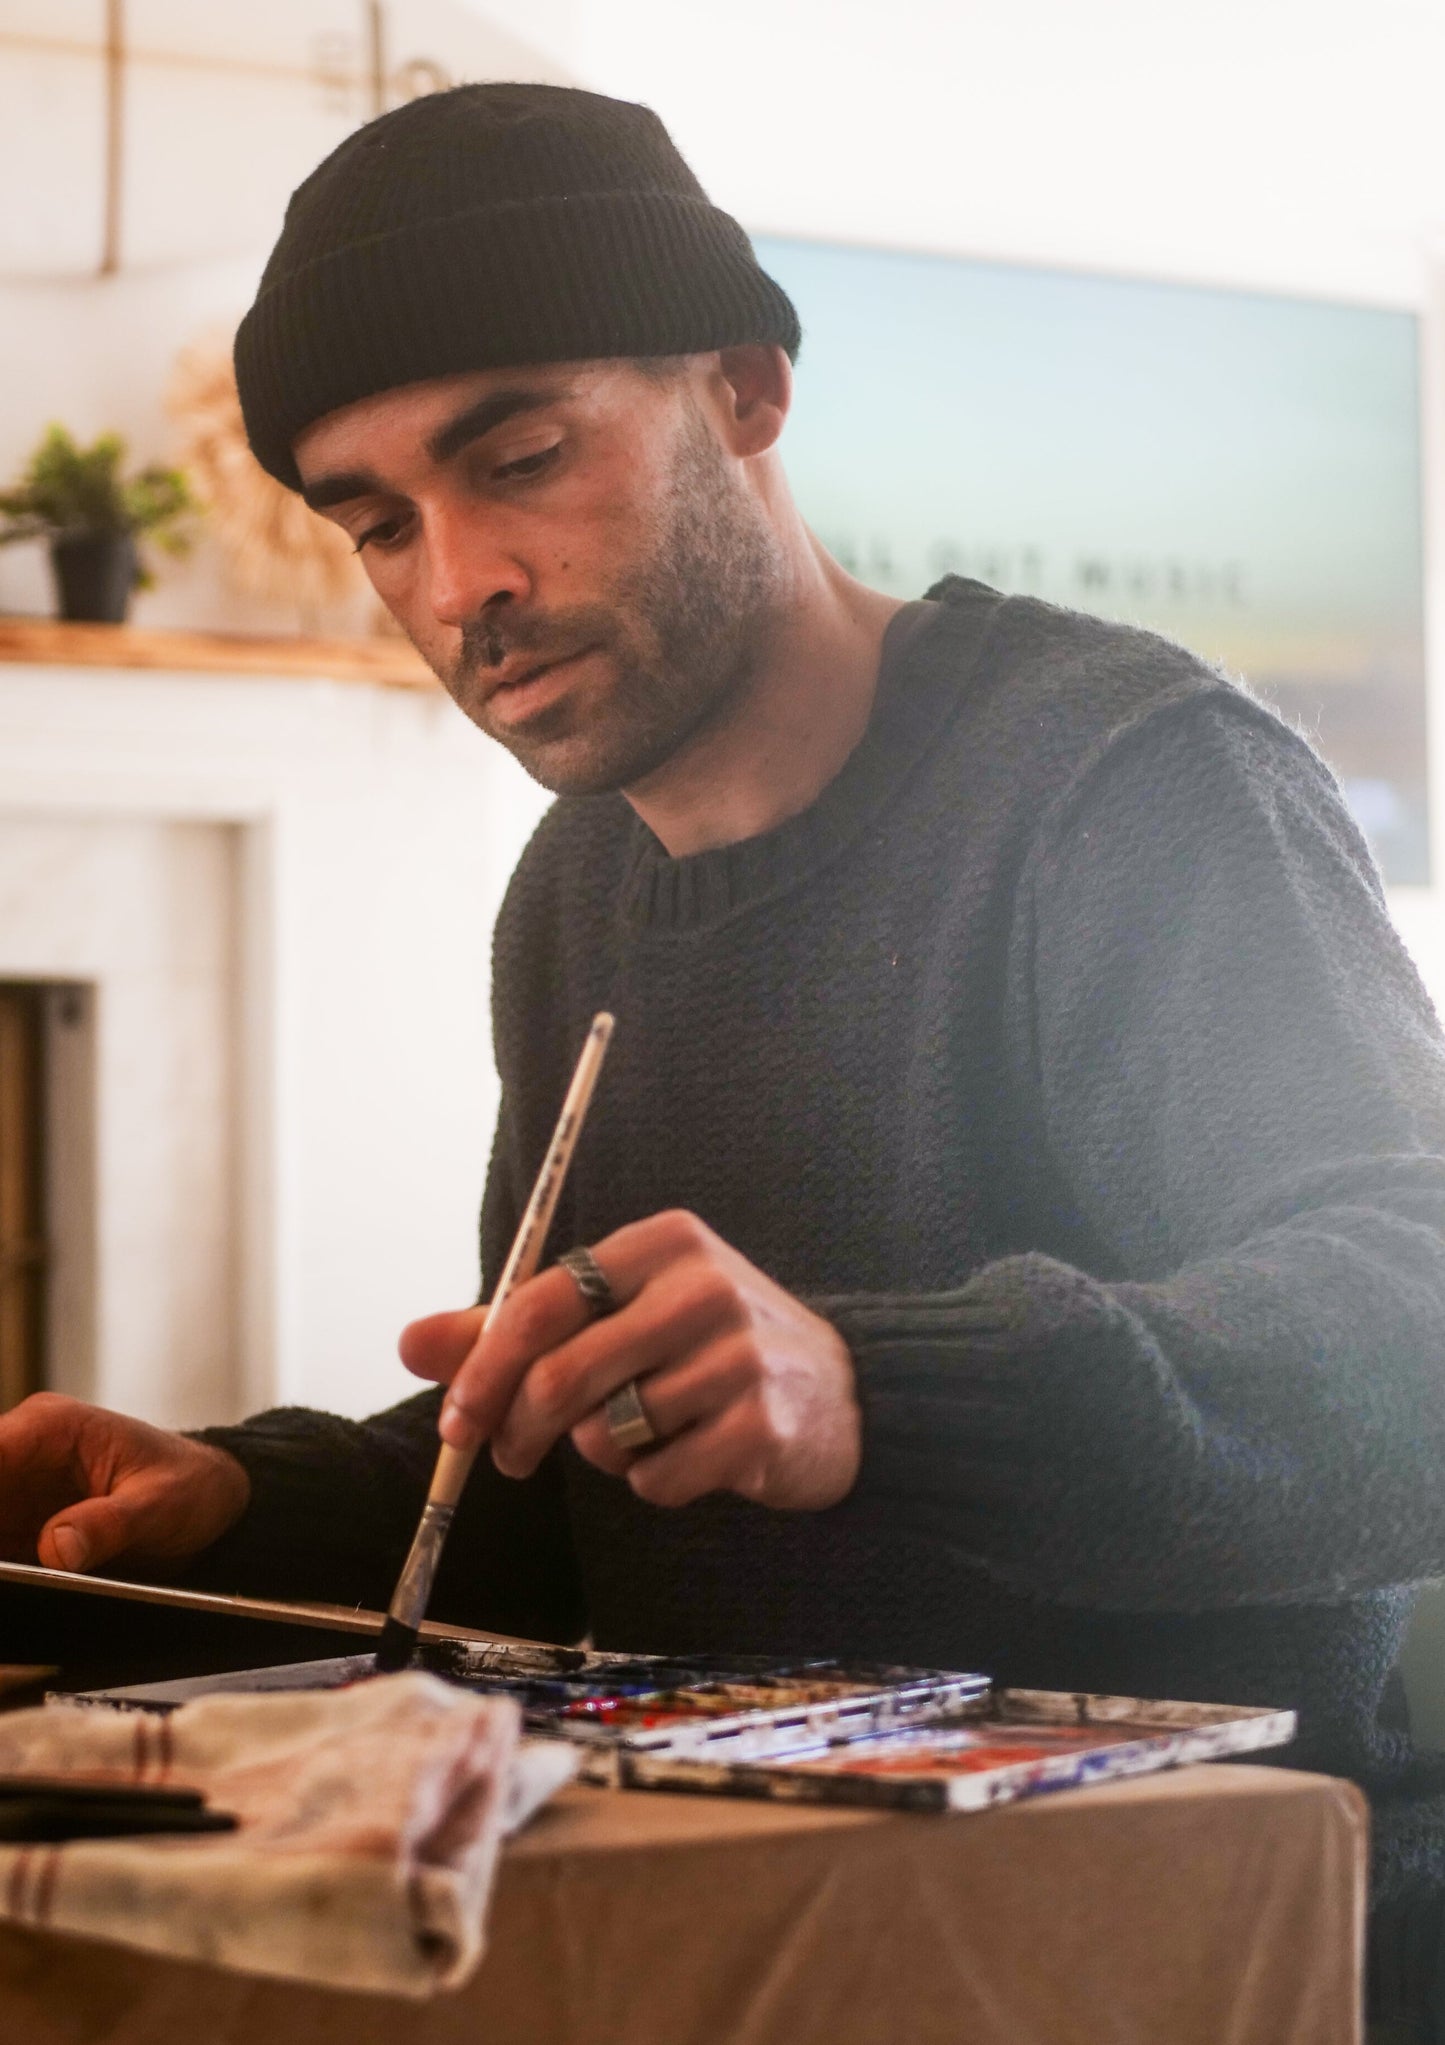 "Painting Surf Scenes With Watercolor" Workshop - At Your Location in Portugal